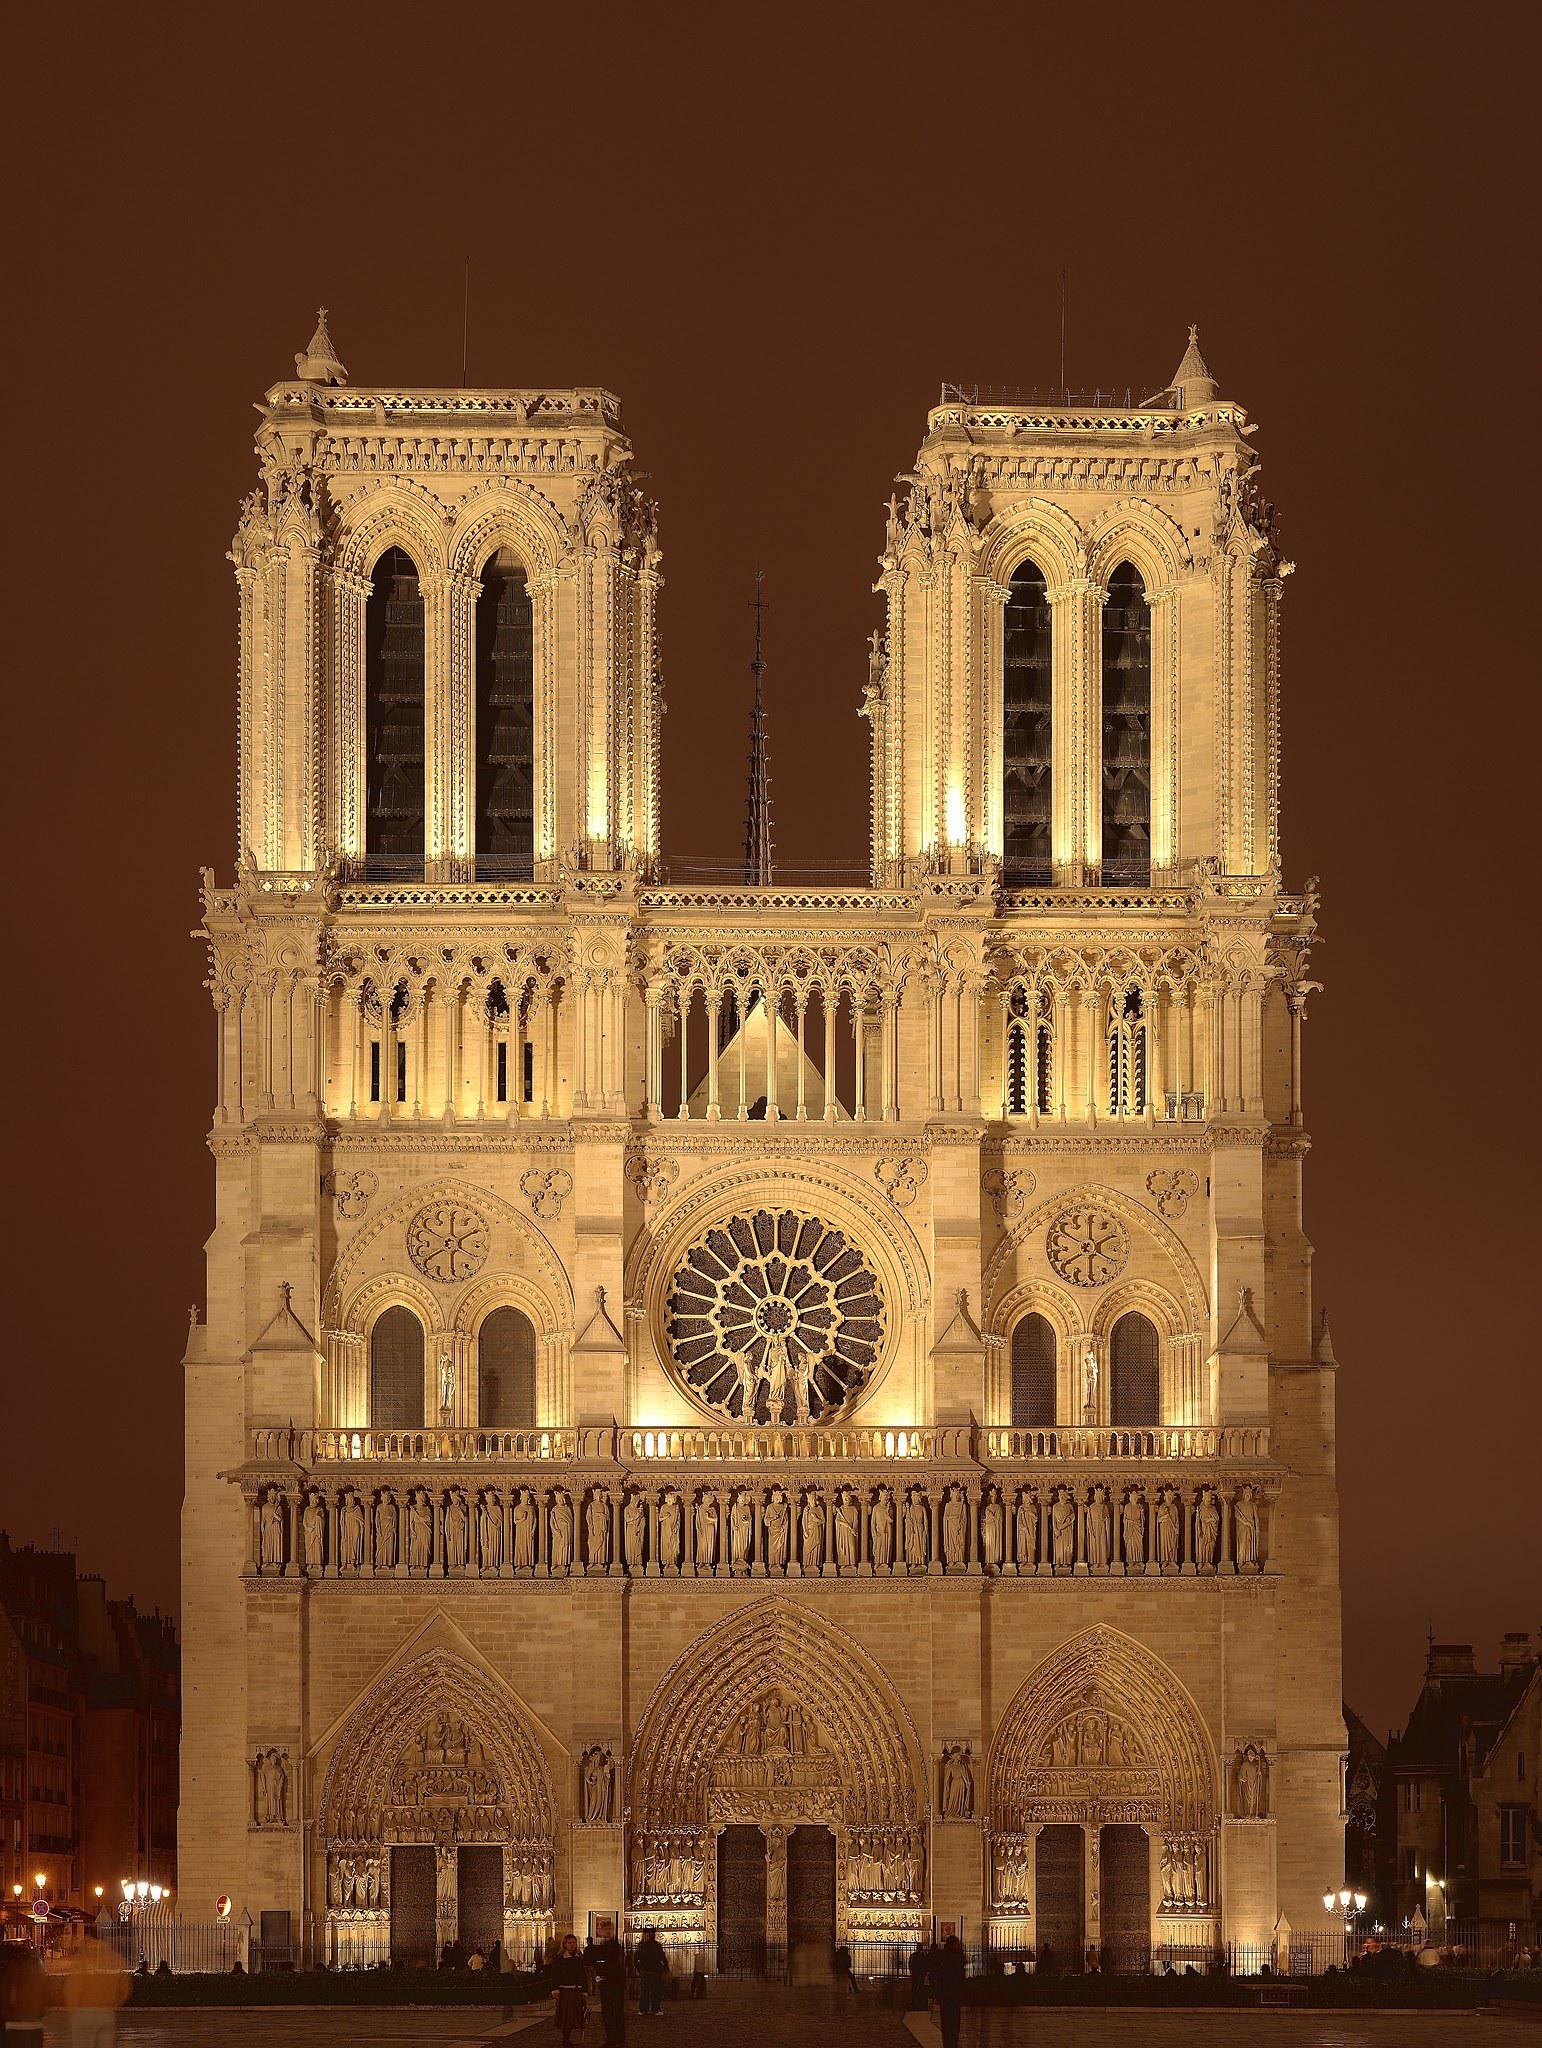 Notre Dame Cathedral: A Jewel Box of Beauty